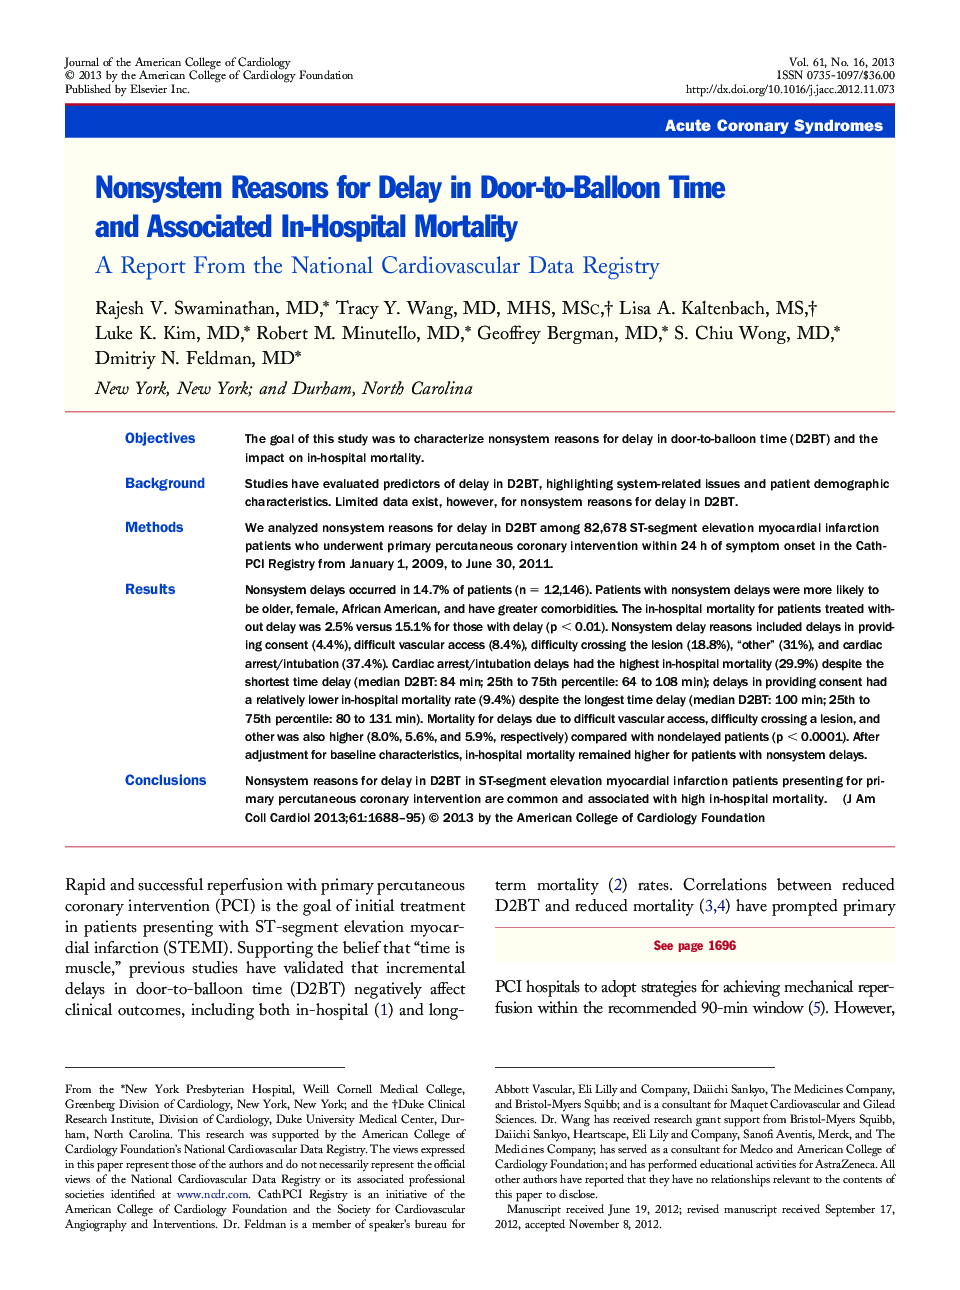 Nonsystem Reasons for Delay in Door-to-Balloon Time and Associated In-Hospital Mortality : A Report From the National Cardiovascular Data Registry